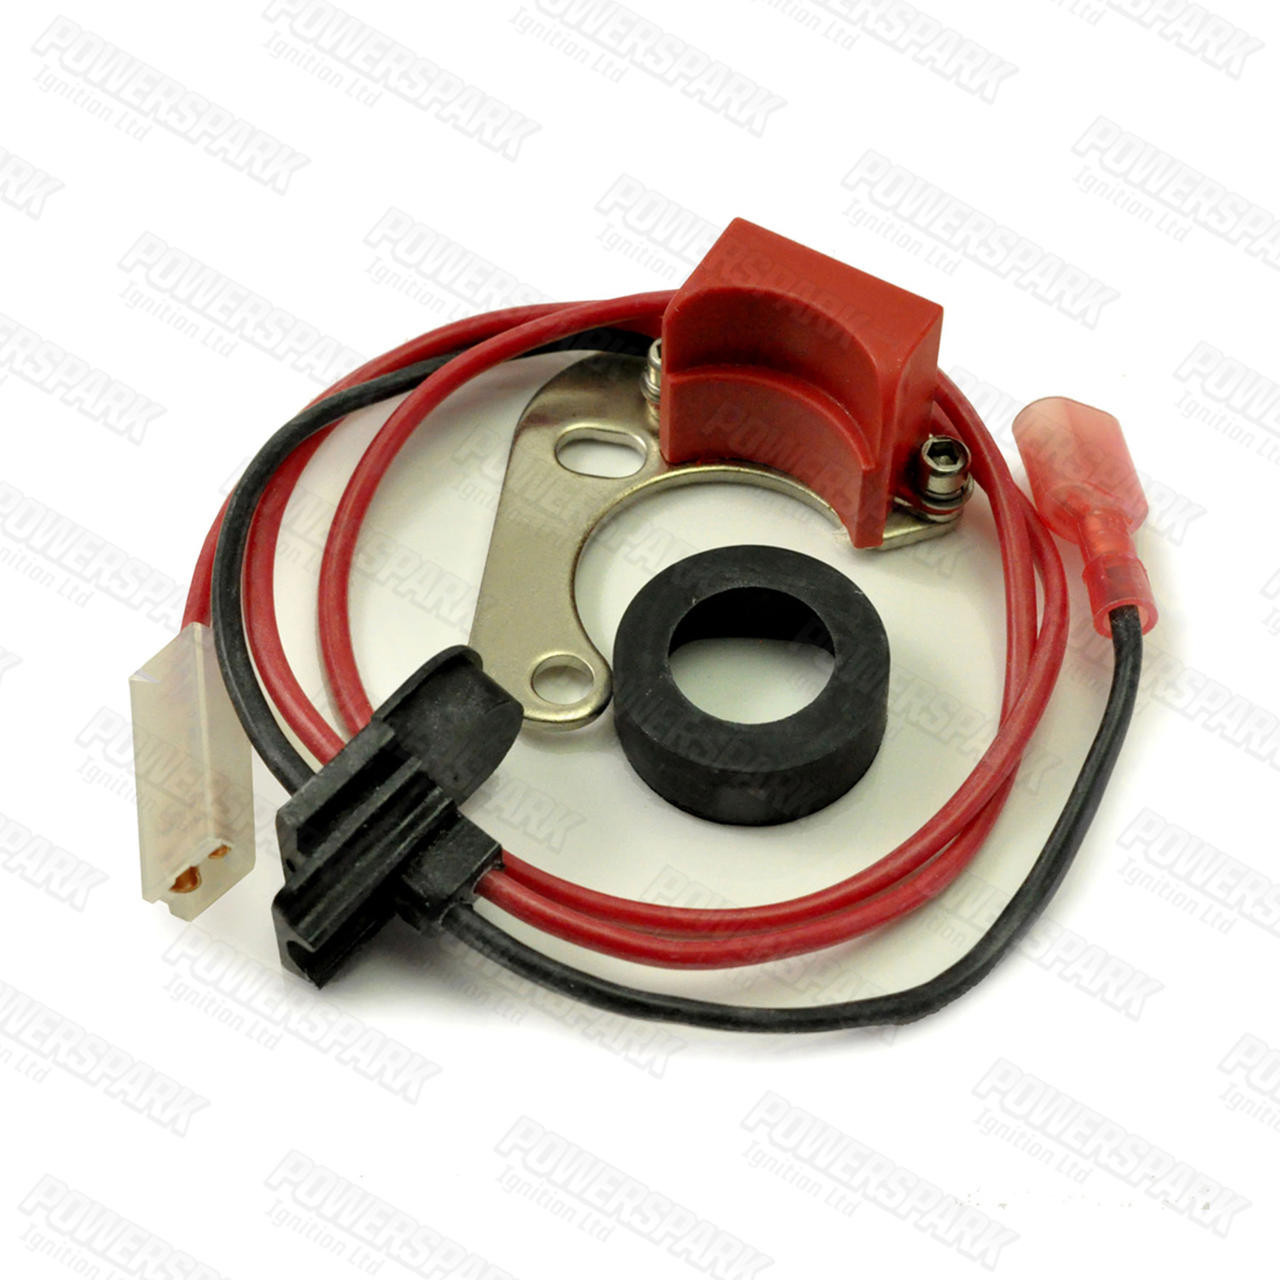 Powerspark Electronic Ignition Kit for Lucas 25D and DM2 Distributor K2 and R1